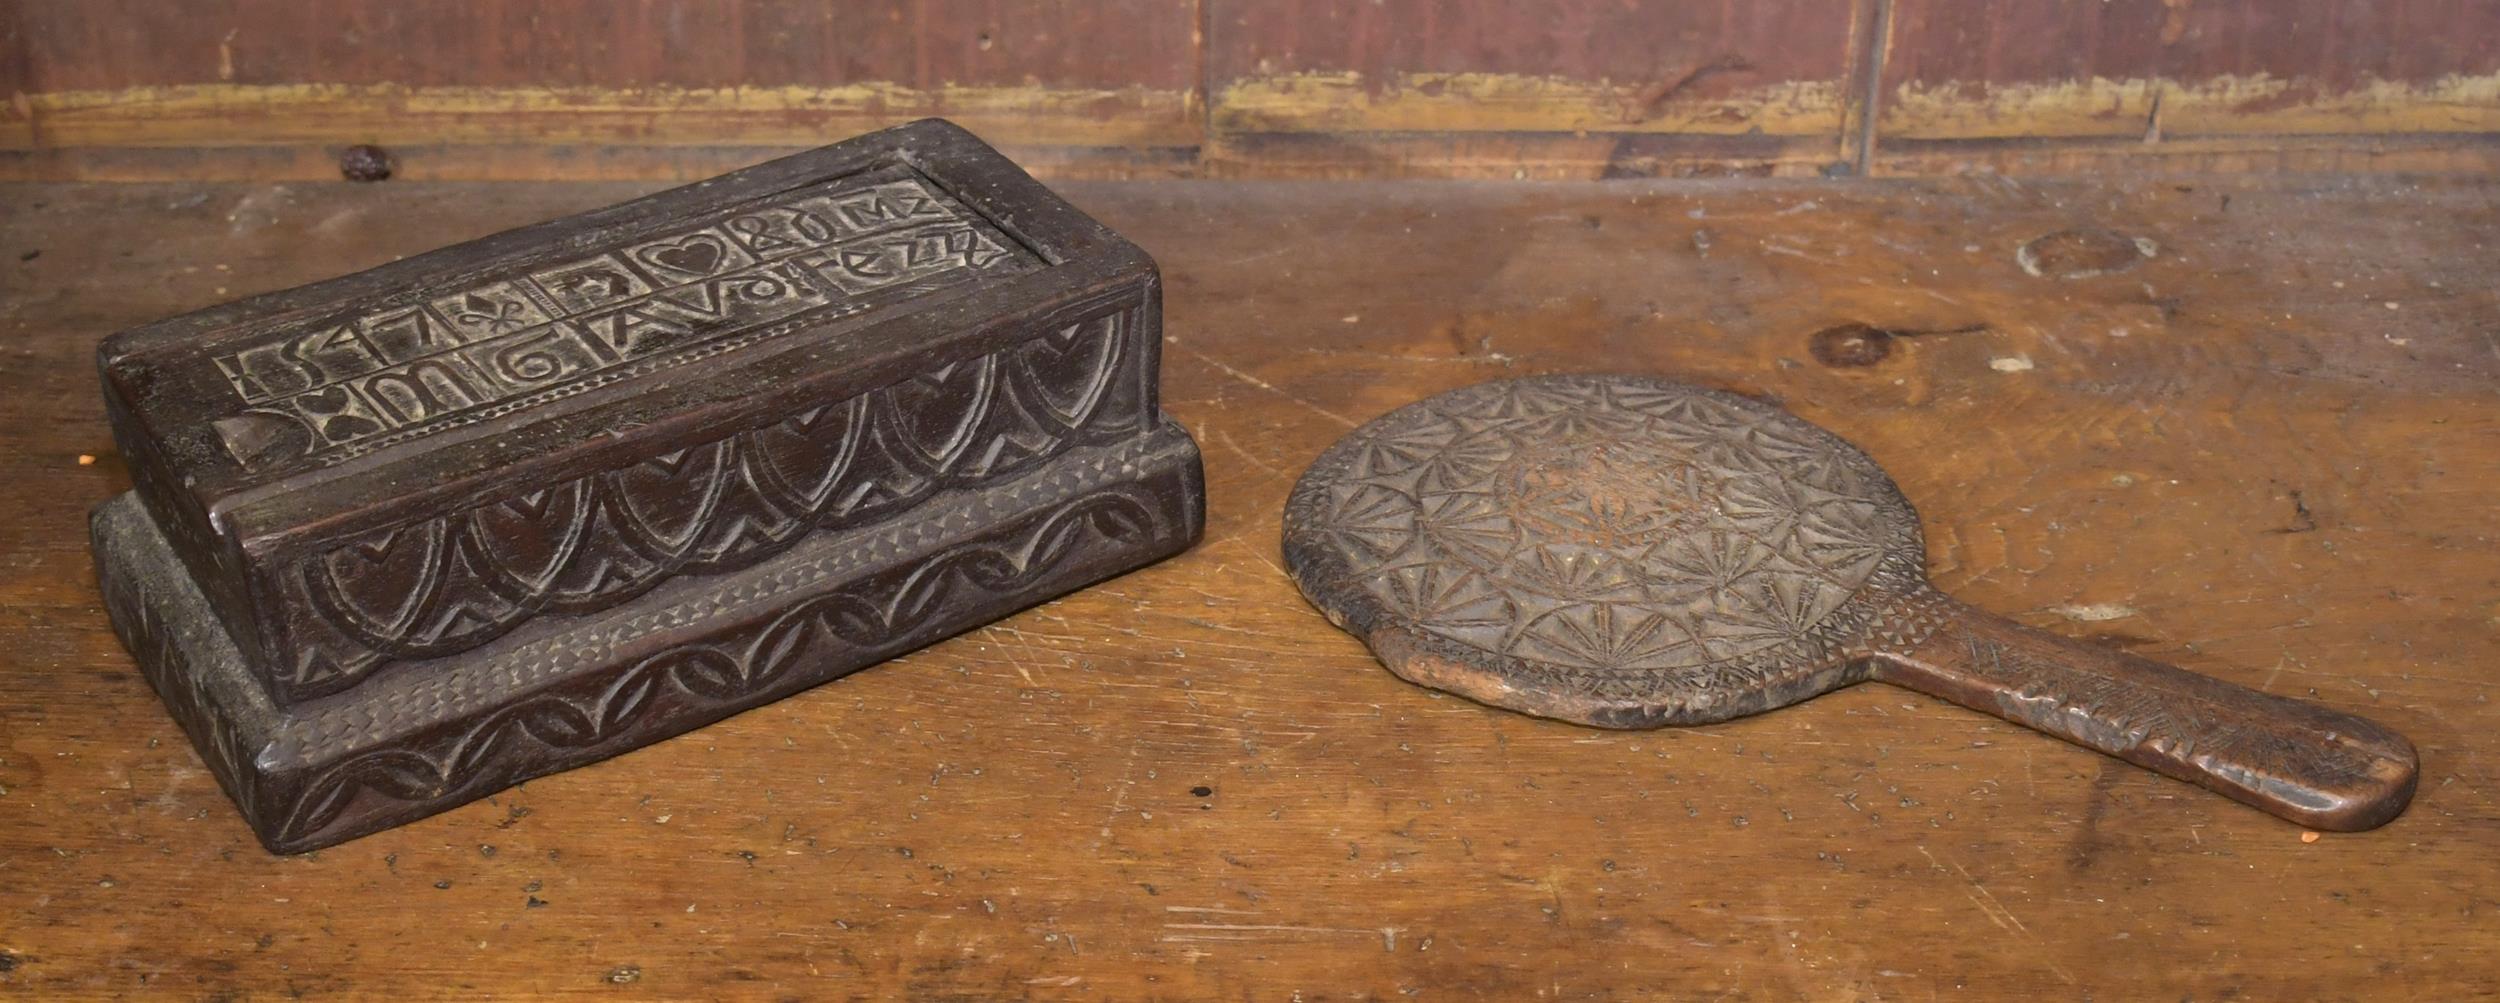 EARLY CARVED SLIDE BOX AND MIRROR.